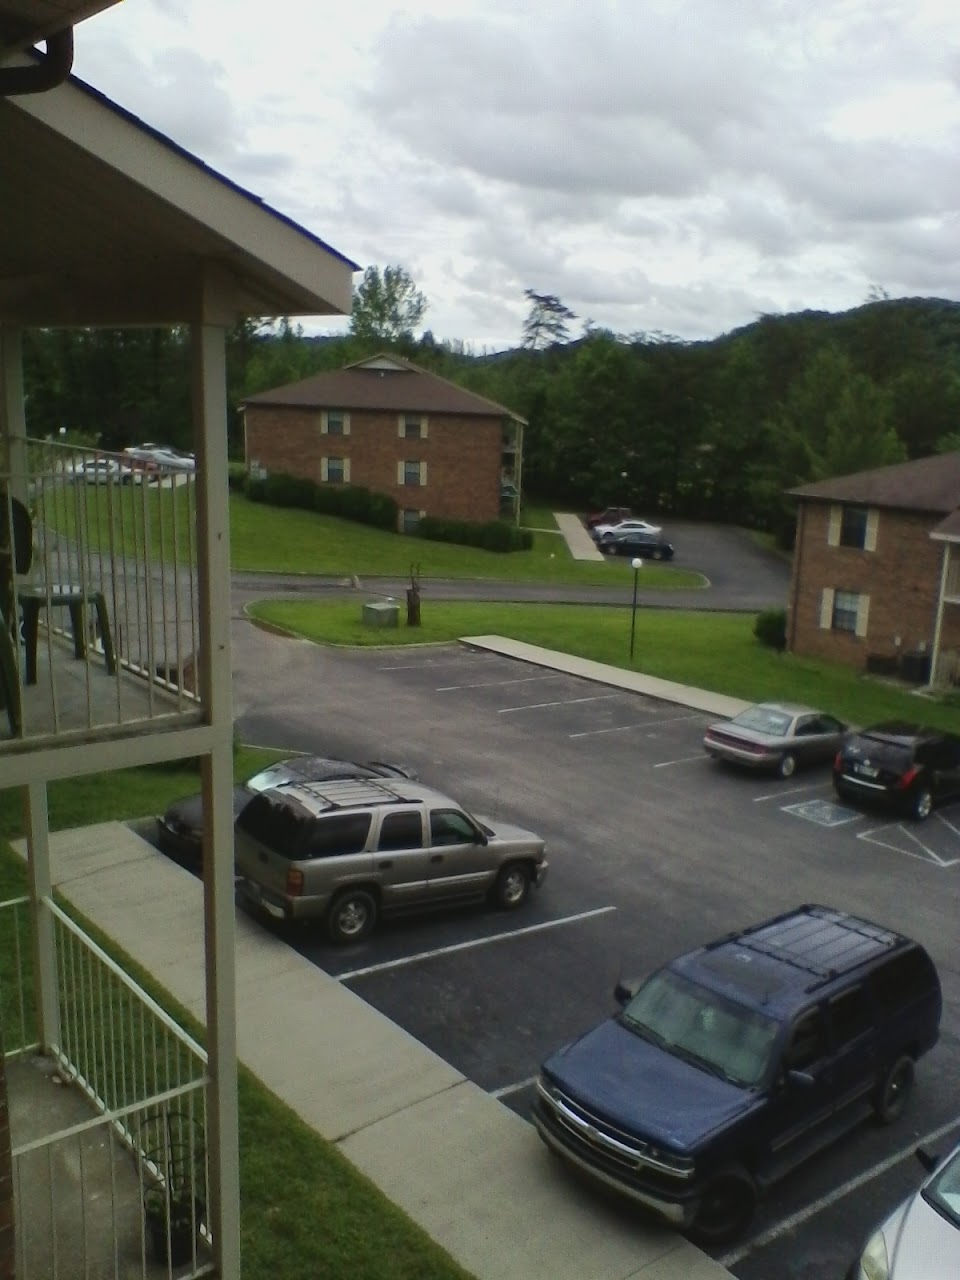 Photo of COOPERTOWN APTS. Affordable housing located at 500 COOPERTOWN LN ONEIDA, TN 37841